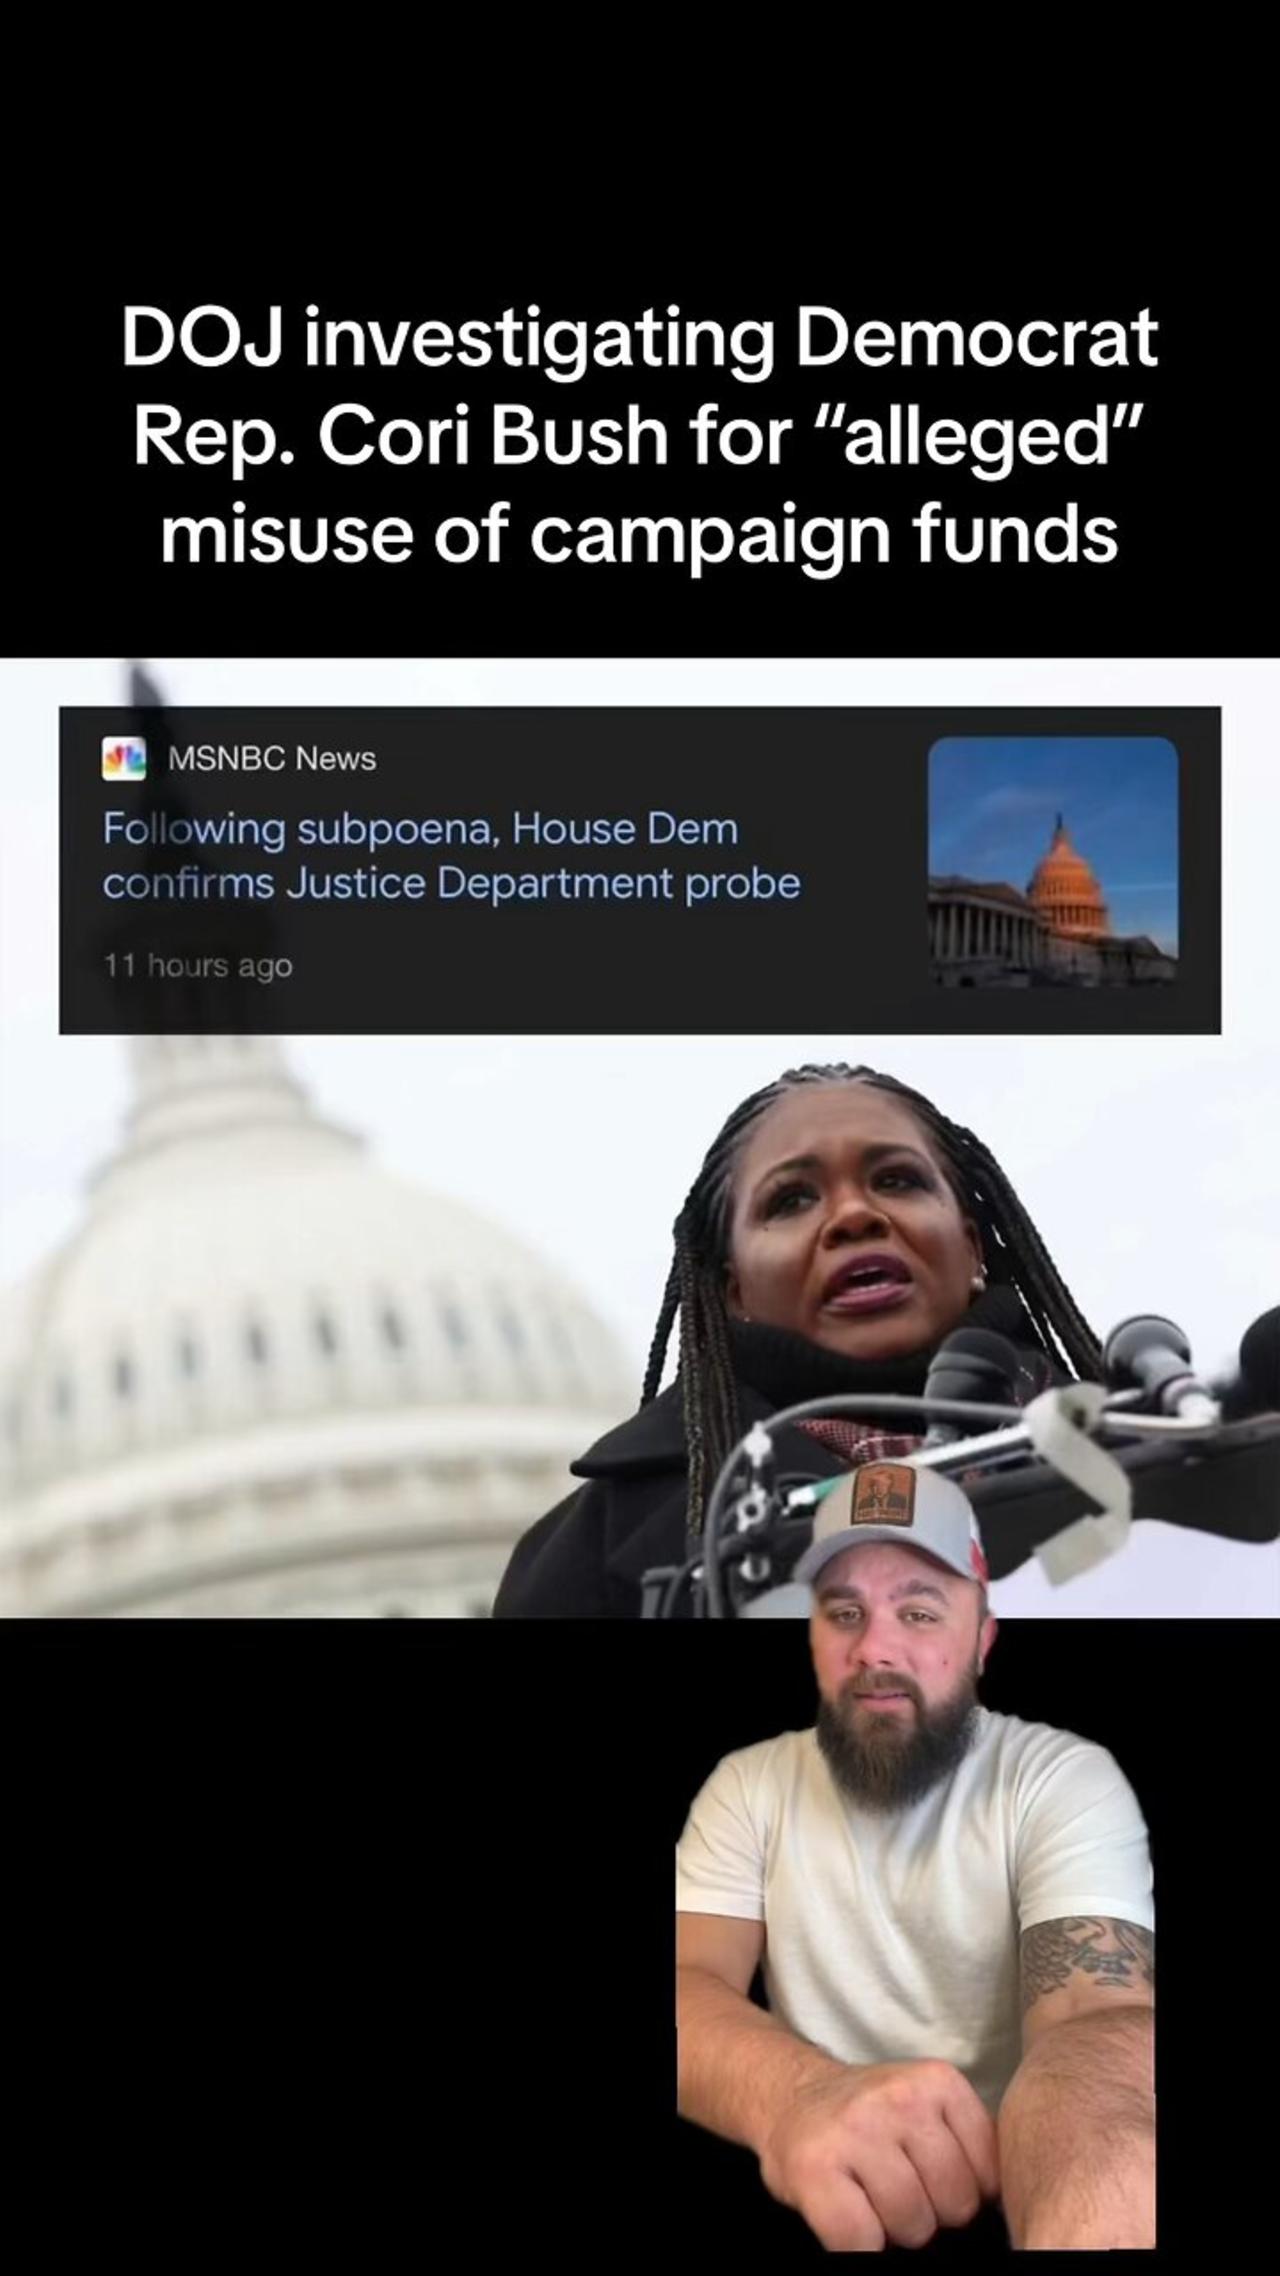 House democrat Cori Bush responds to being investigated for alleged misuse of campaign funds by DOJ